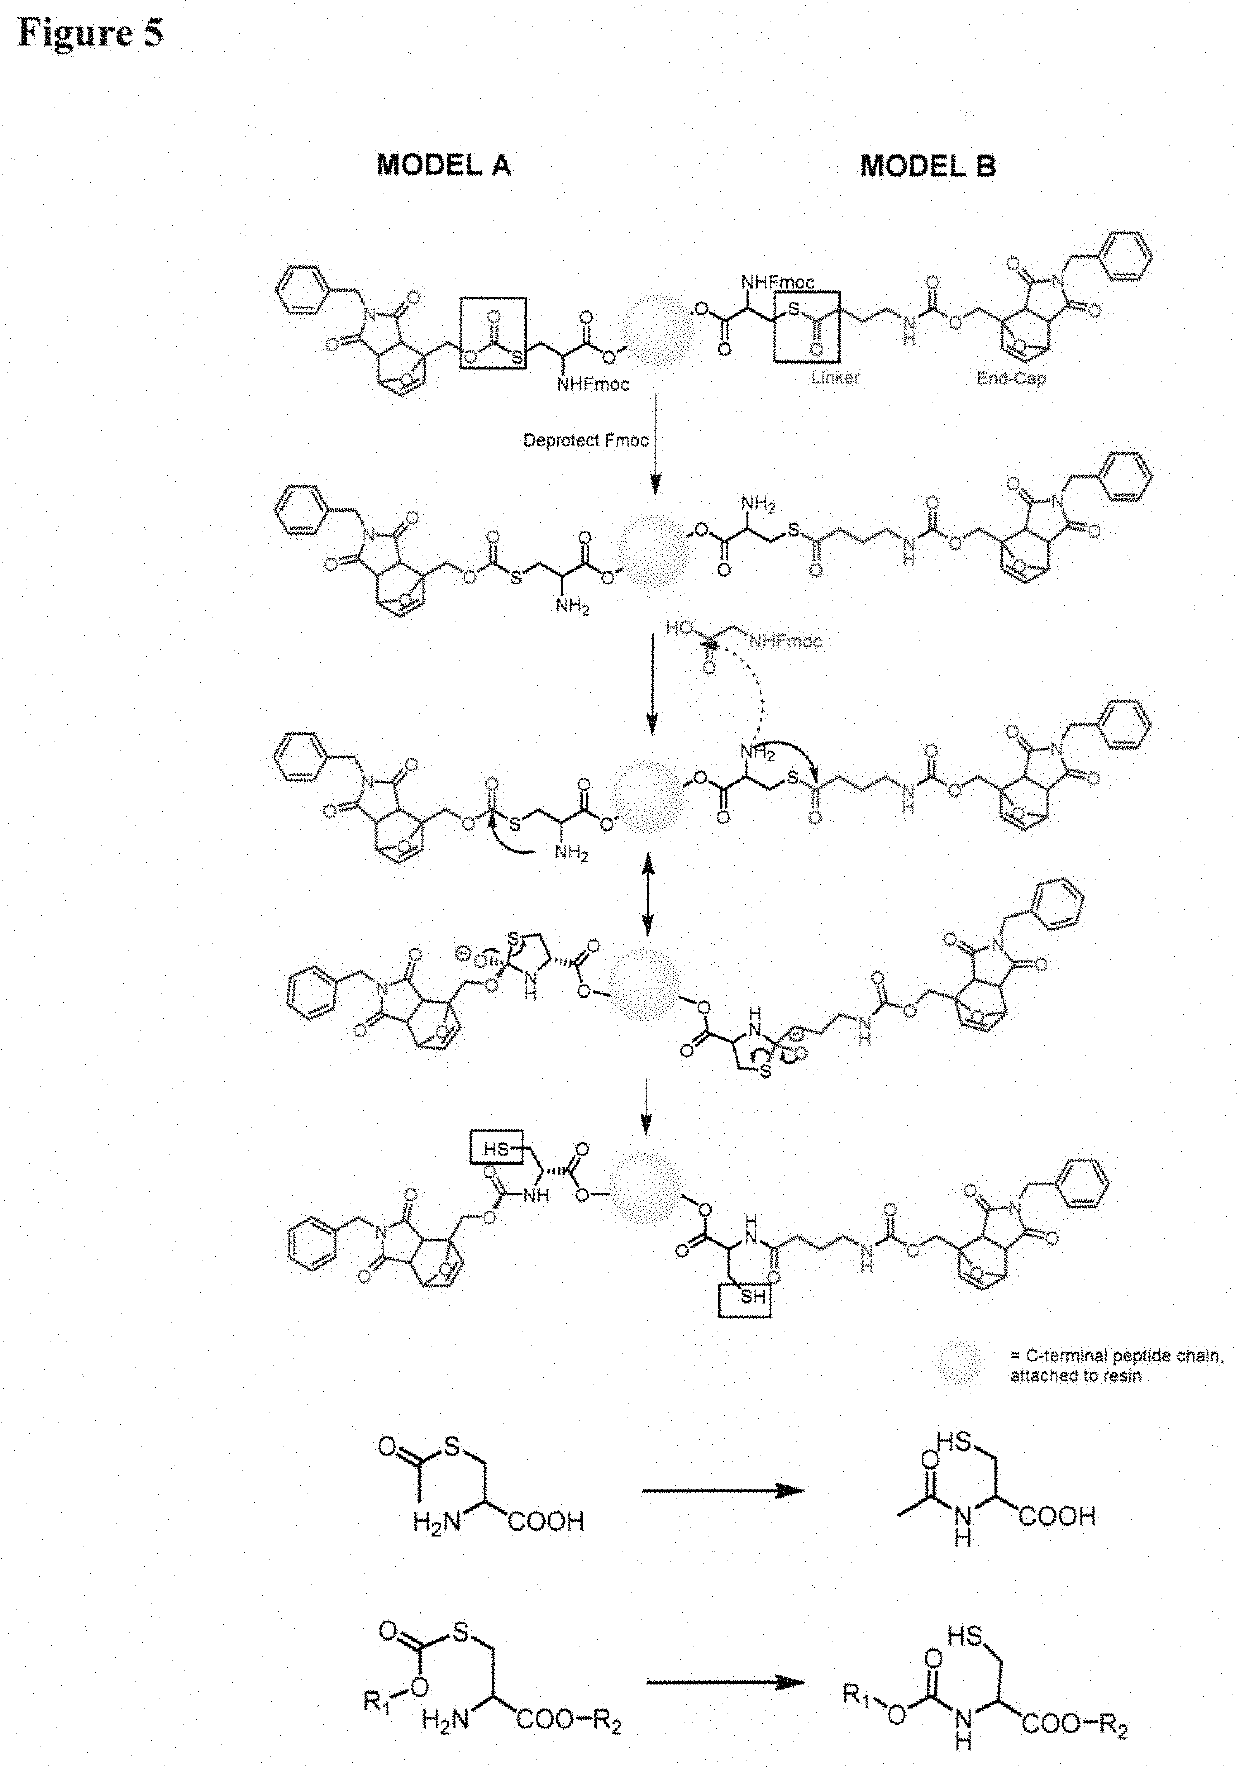 Thermally Sensitive Protecting Groups for Cysteine for Peptide Cyclization and Selective Disulfide Bond Formation